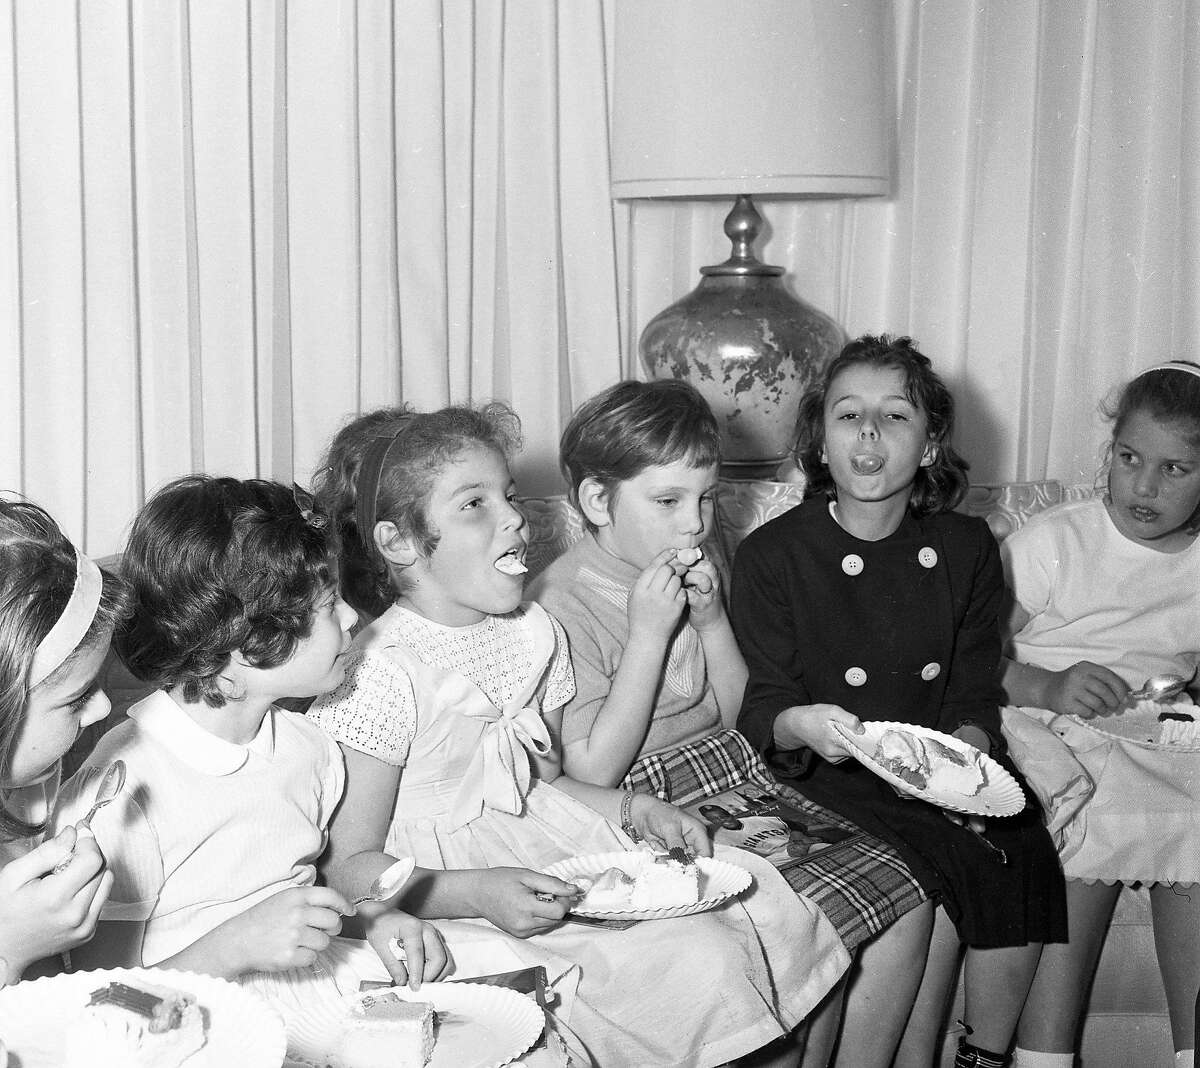 Children eat cake and ice cream during a party at Willie Mays' house in San Francisco on Feb. 16, 1963. The Giants players invited his neighbors.